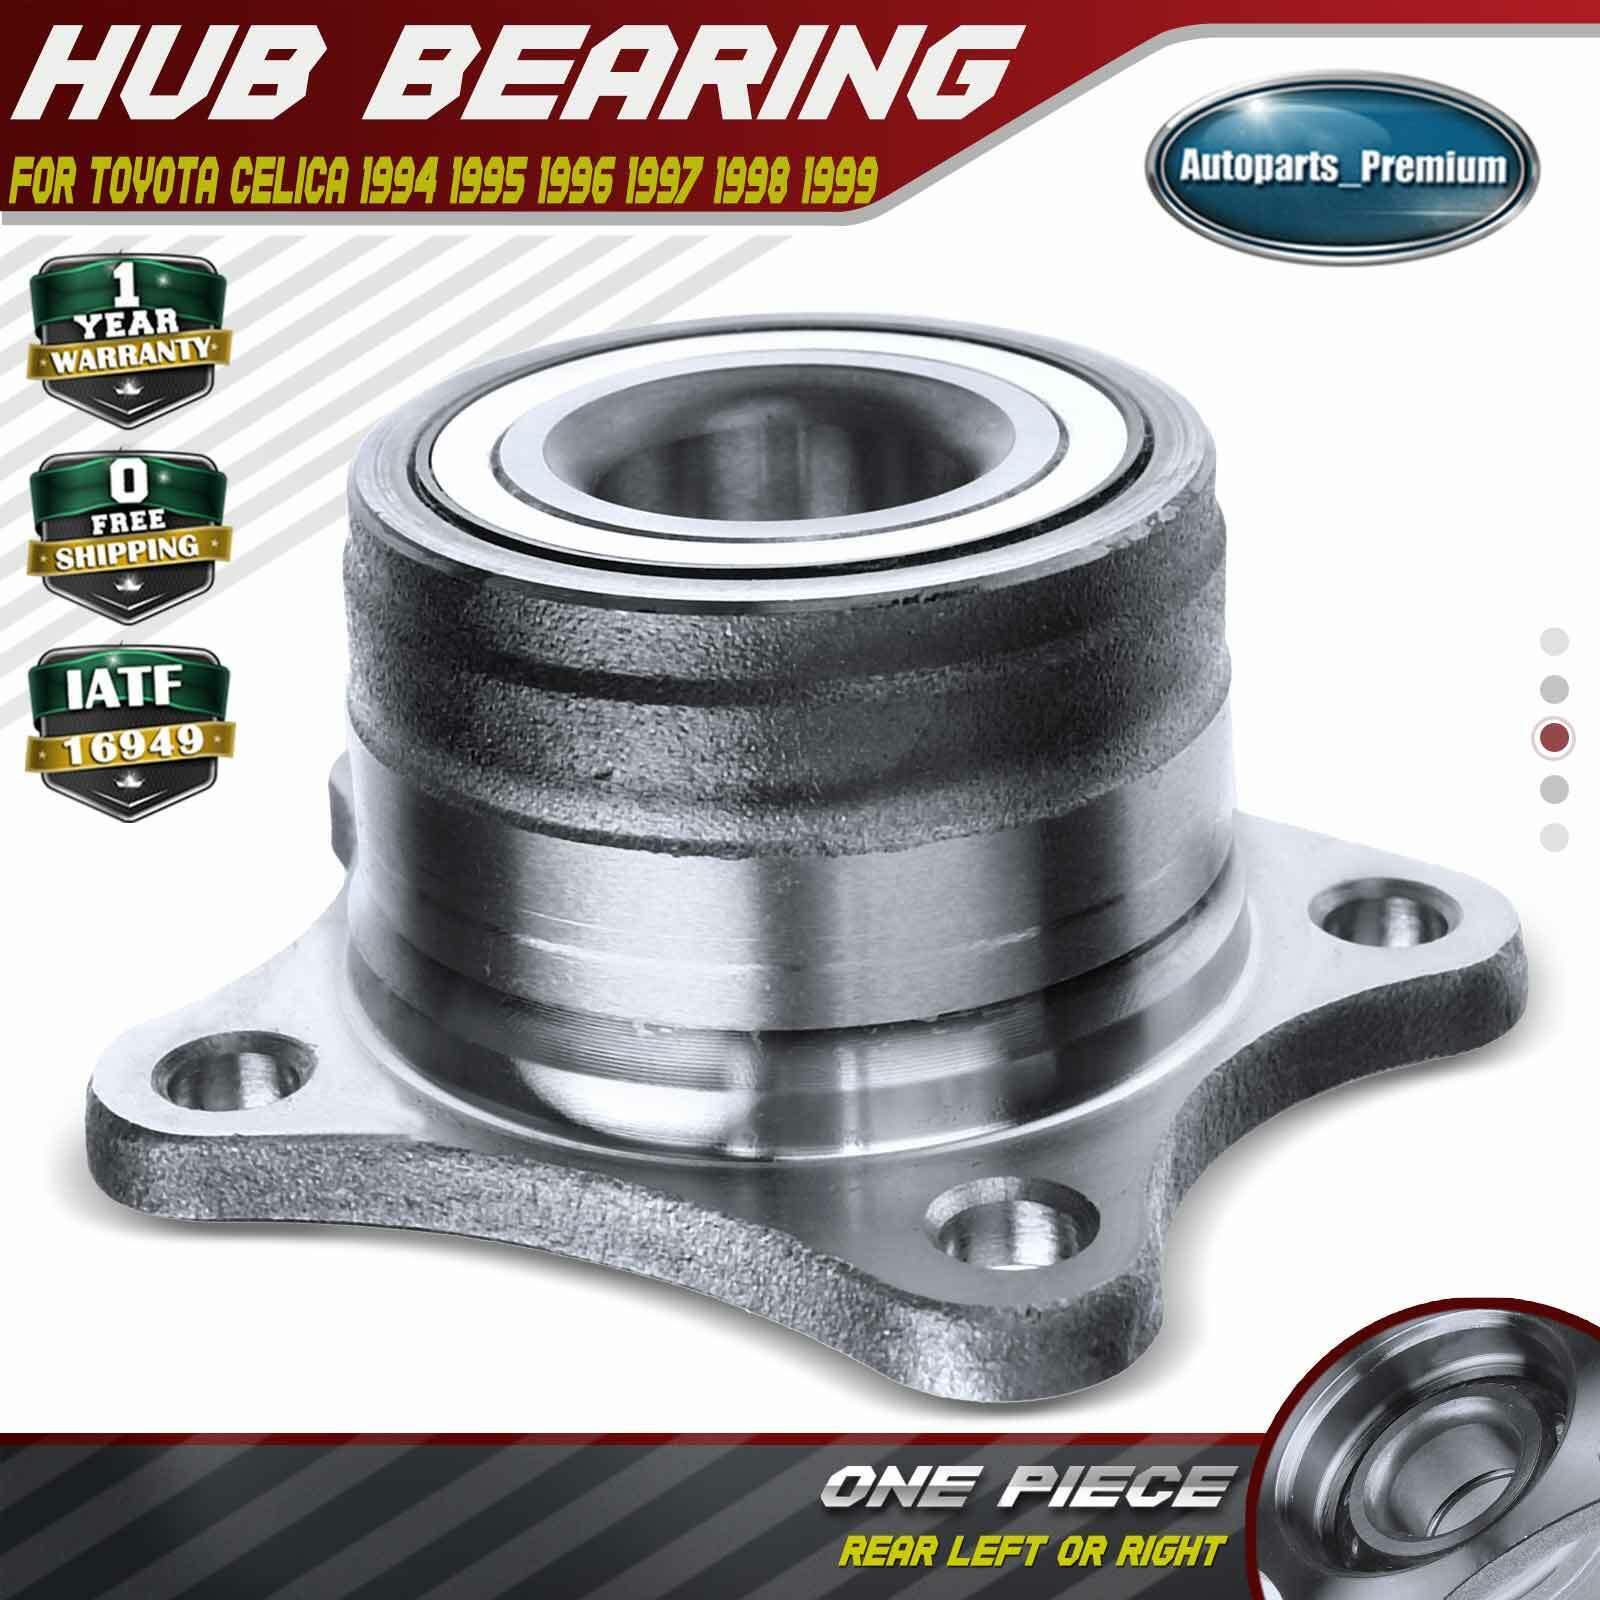 Wheel Hub Bearing Assembly for Toyota Celica 1994-1999 Rear Left or Right Side